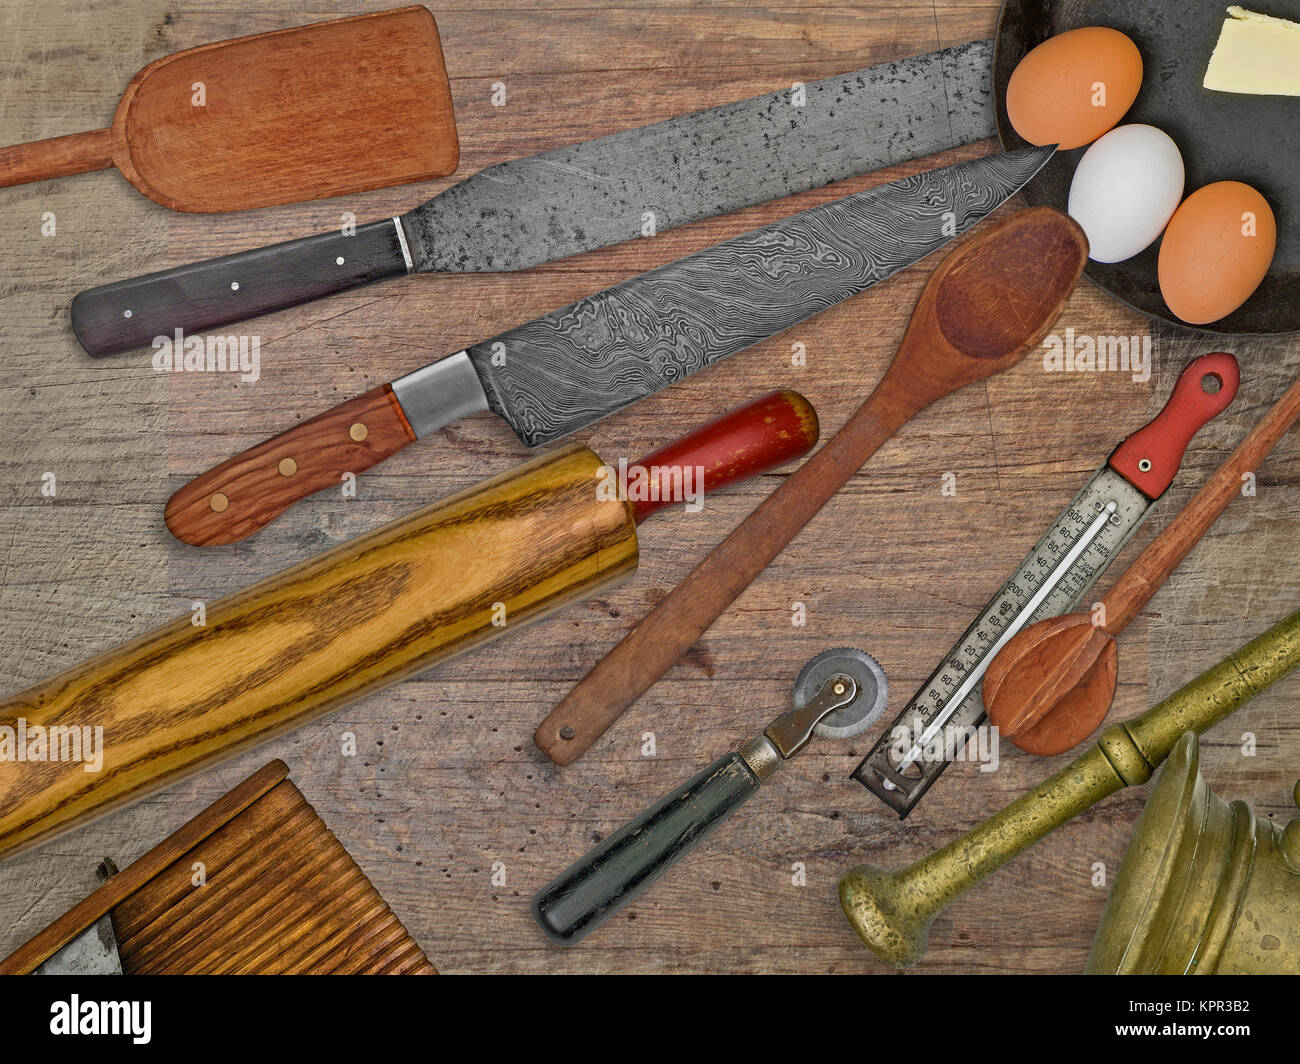 vintage bakery shop utensils over wooden table Stock Photo